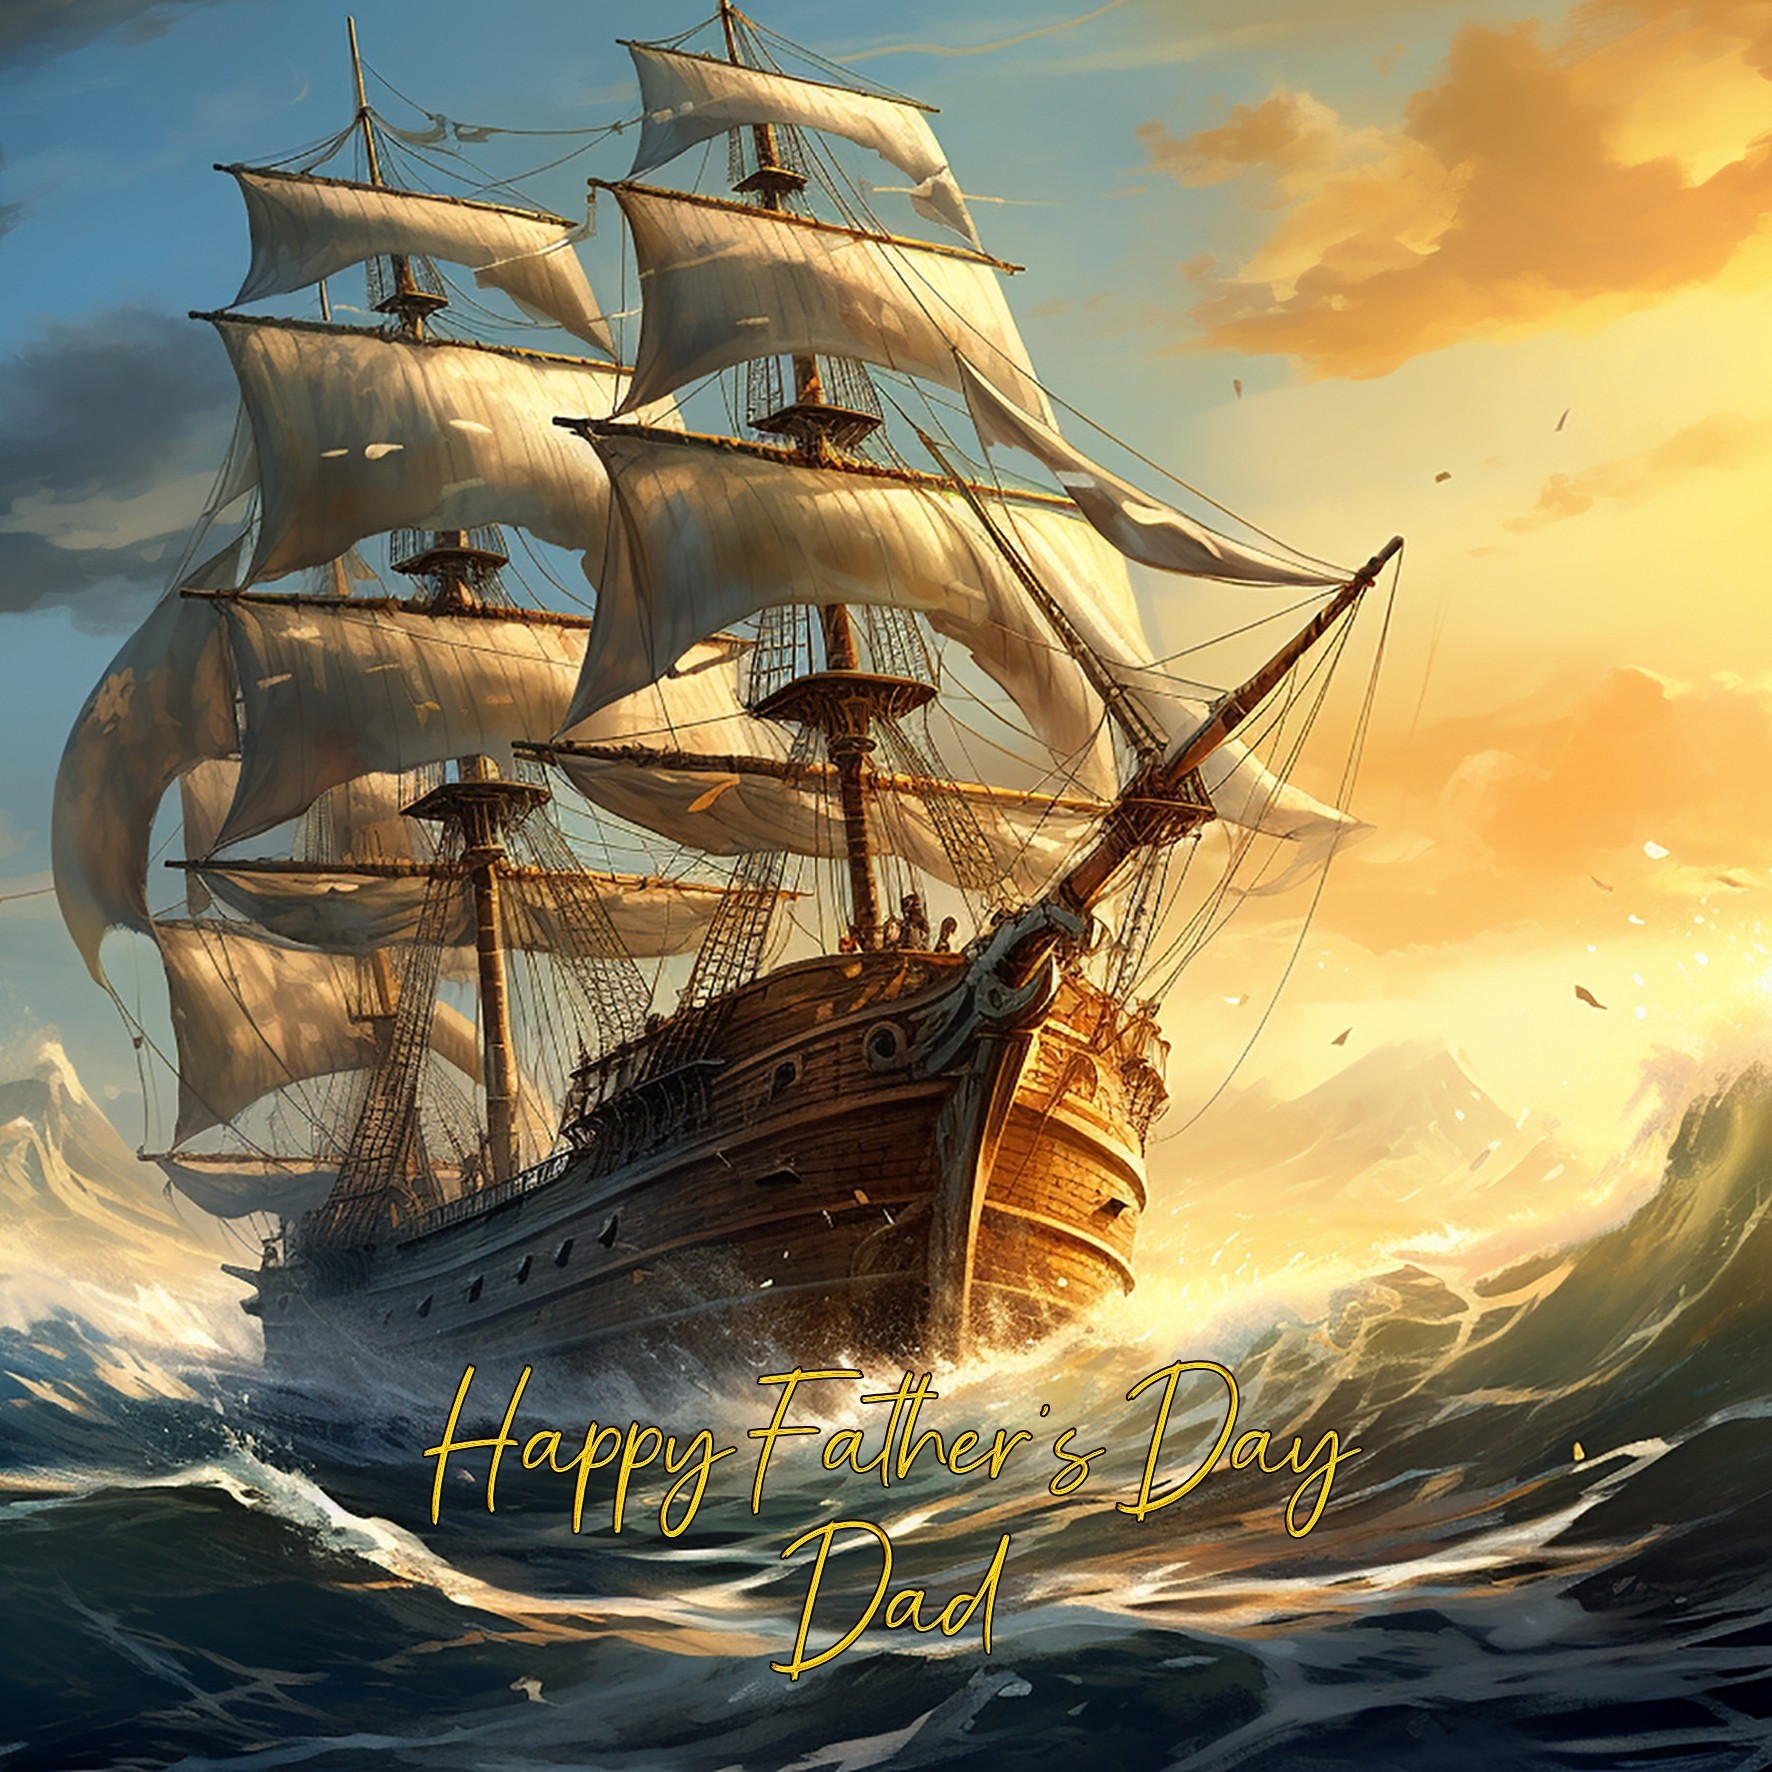 Ship Scenery Art Square Fathers Day Card For Dad (Design 4)